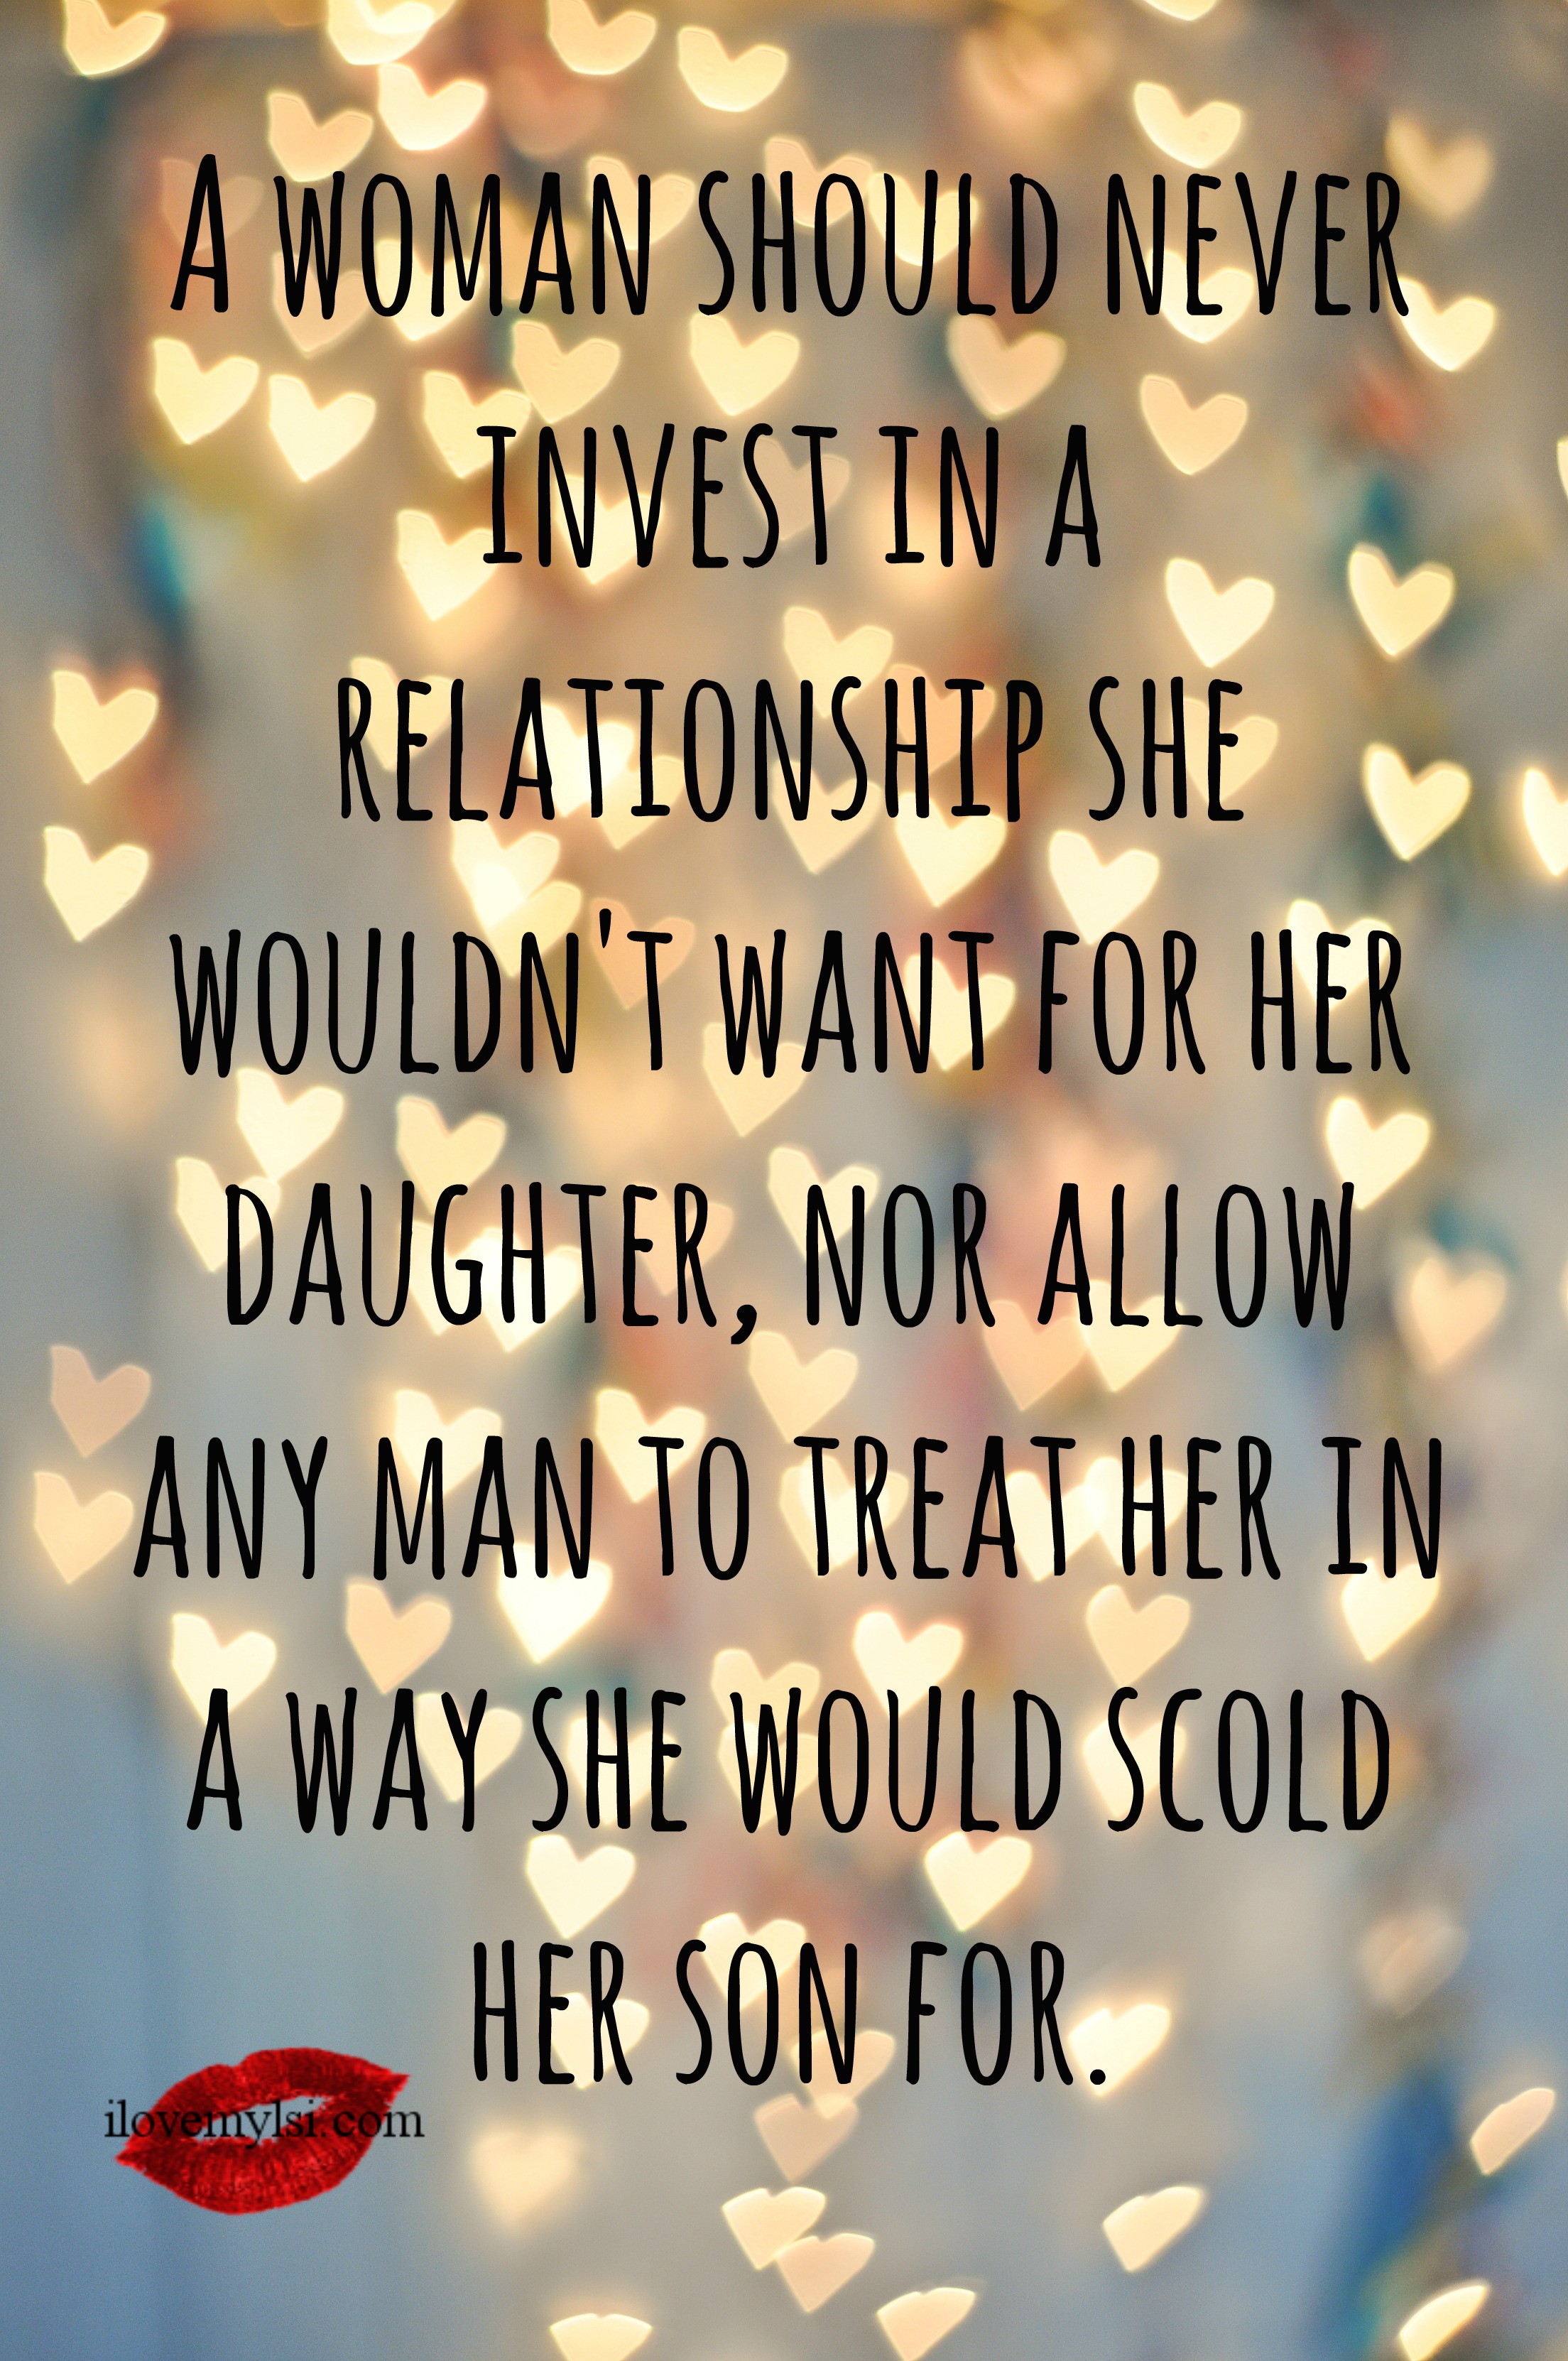 2019719148 A woman should never invest in a relationship